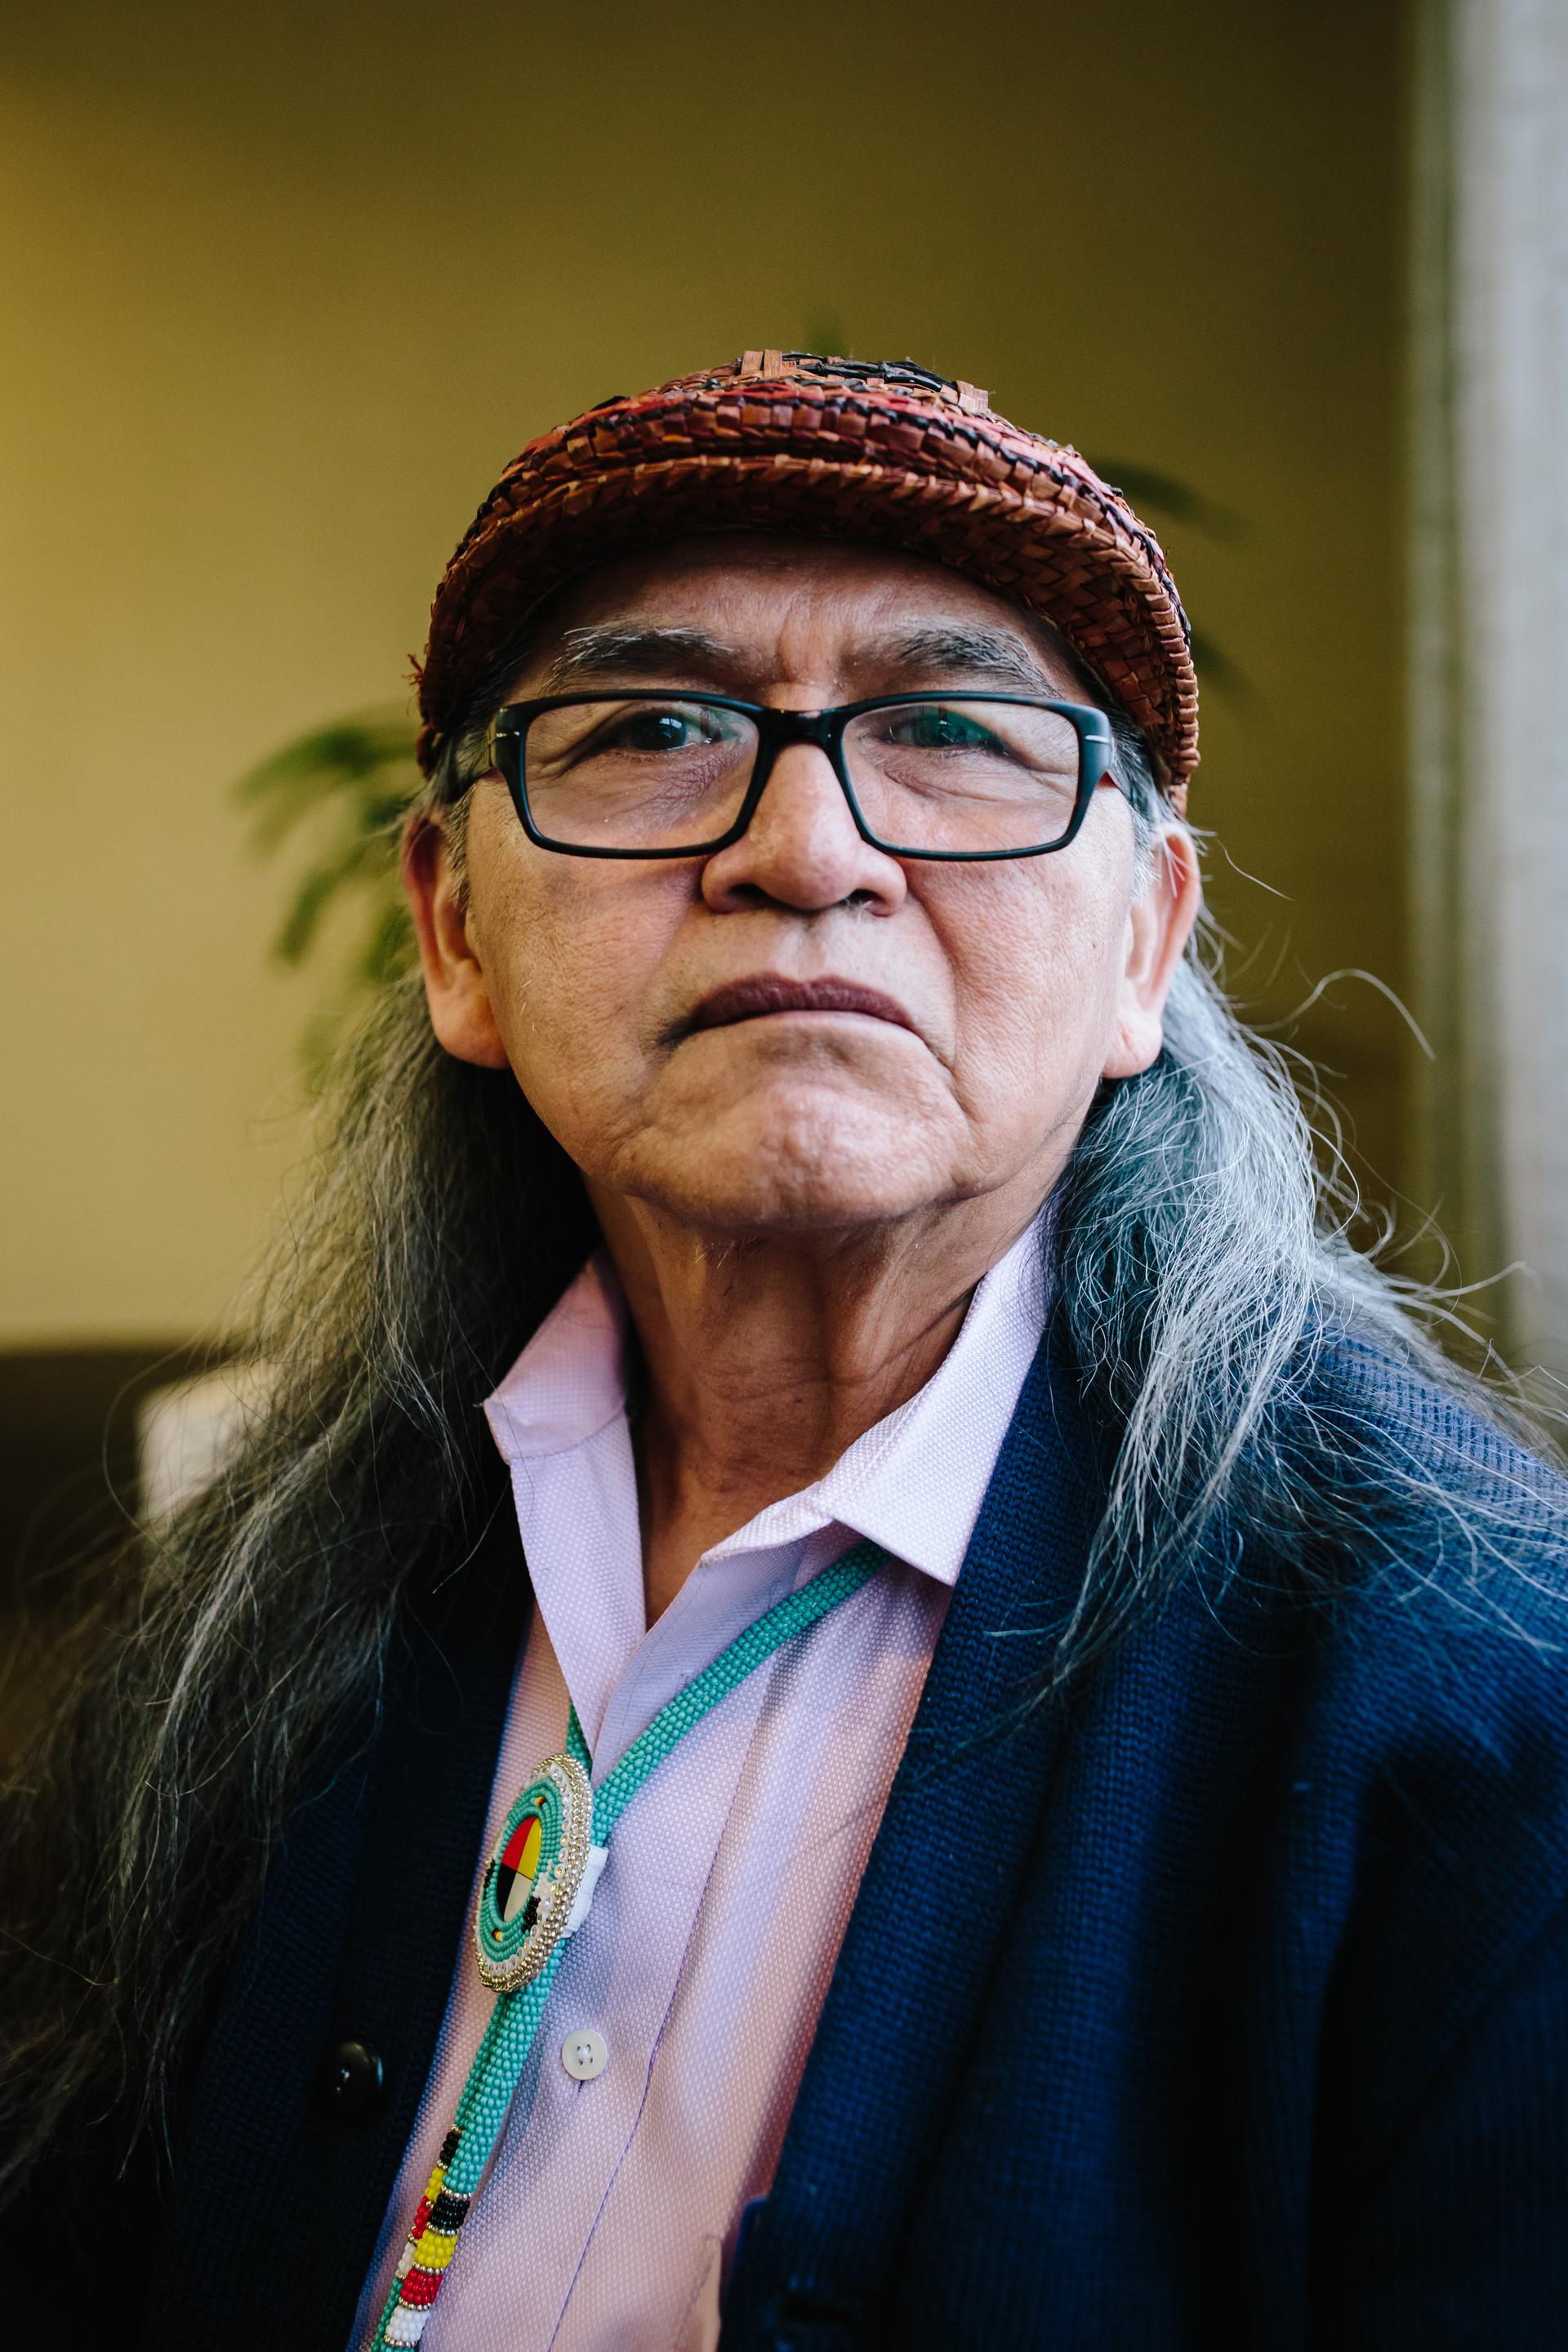 An older Indigenous man wearing hat looks towards the camera.